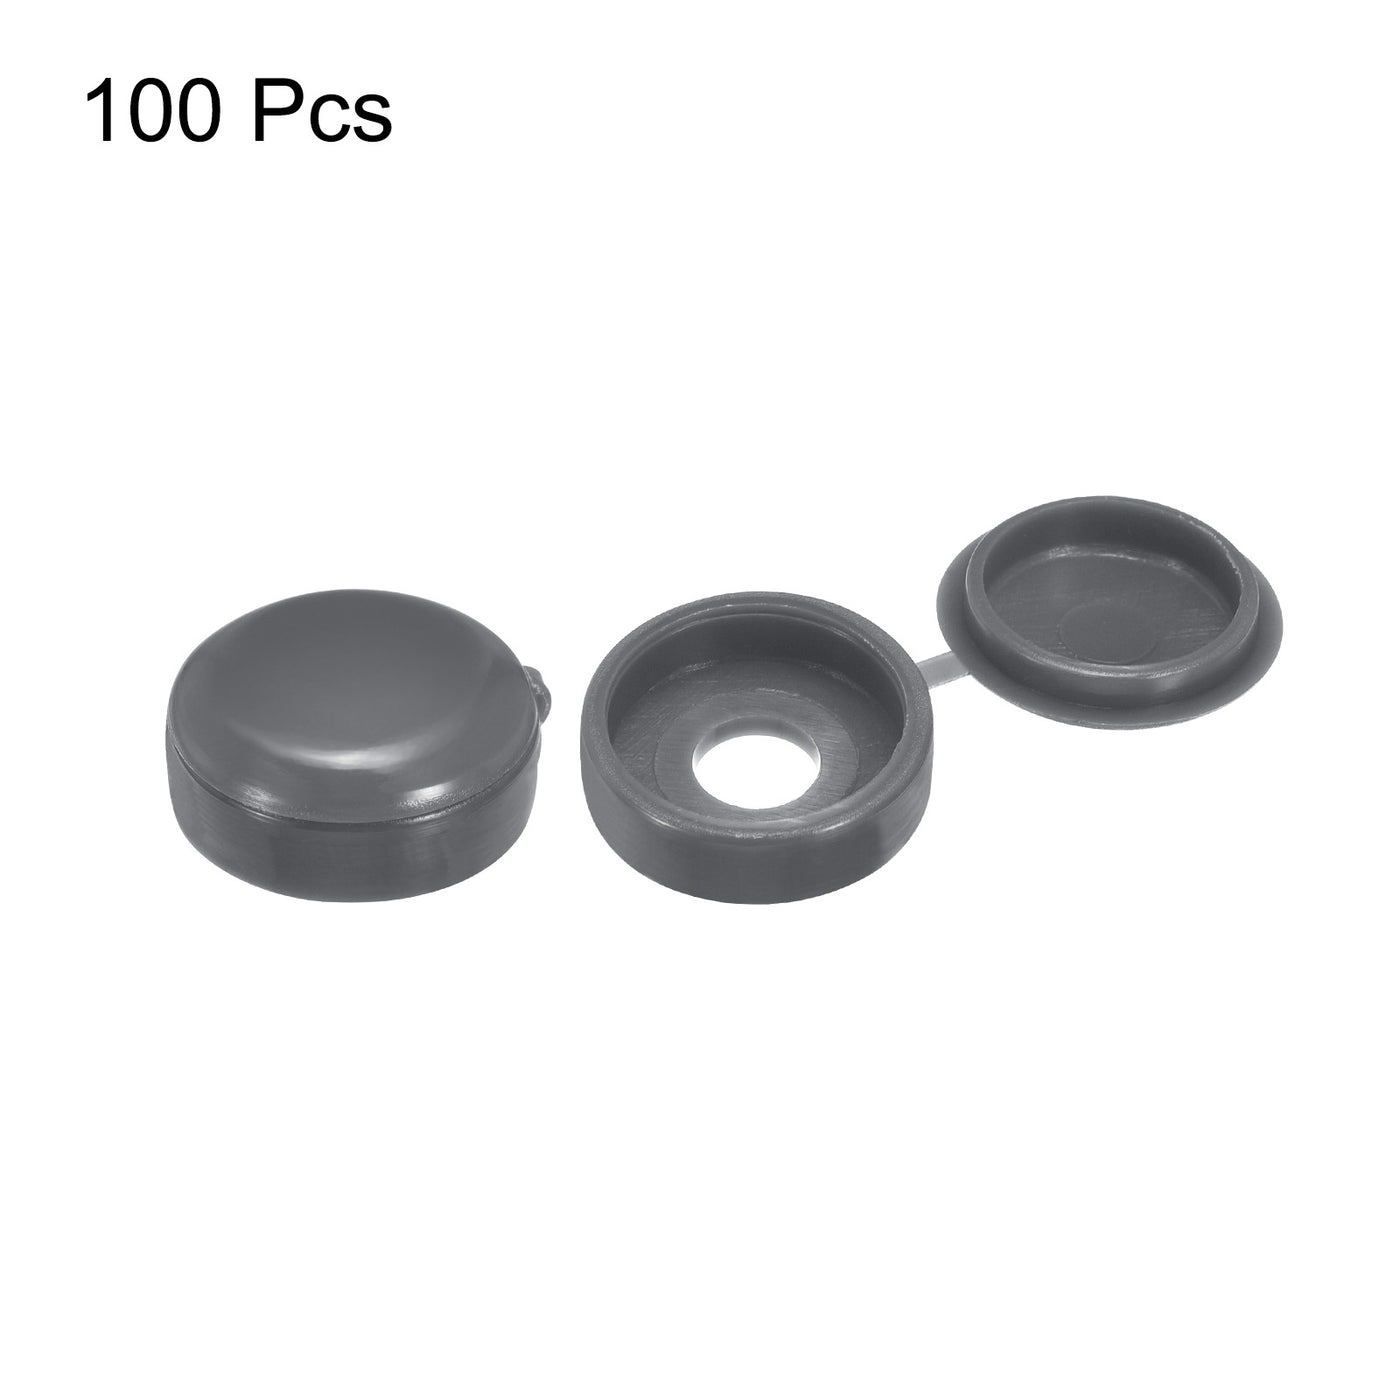 uxcell Uxcell 100Pcs 3mm Hinged Screw Cover Caps Plastic Fold Screw Snap Covers, Dark Gray